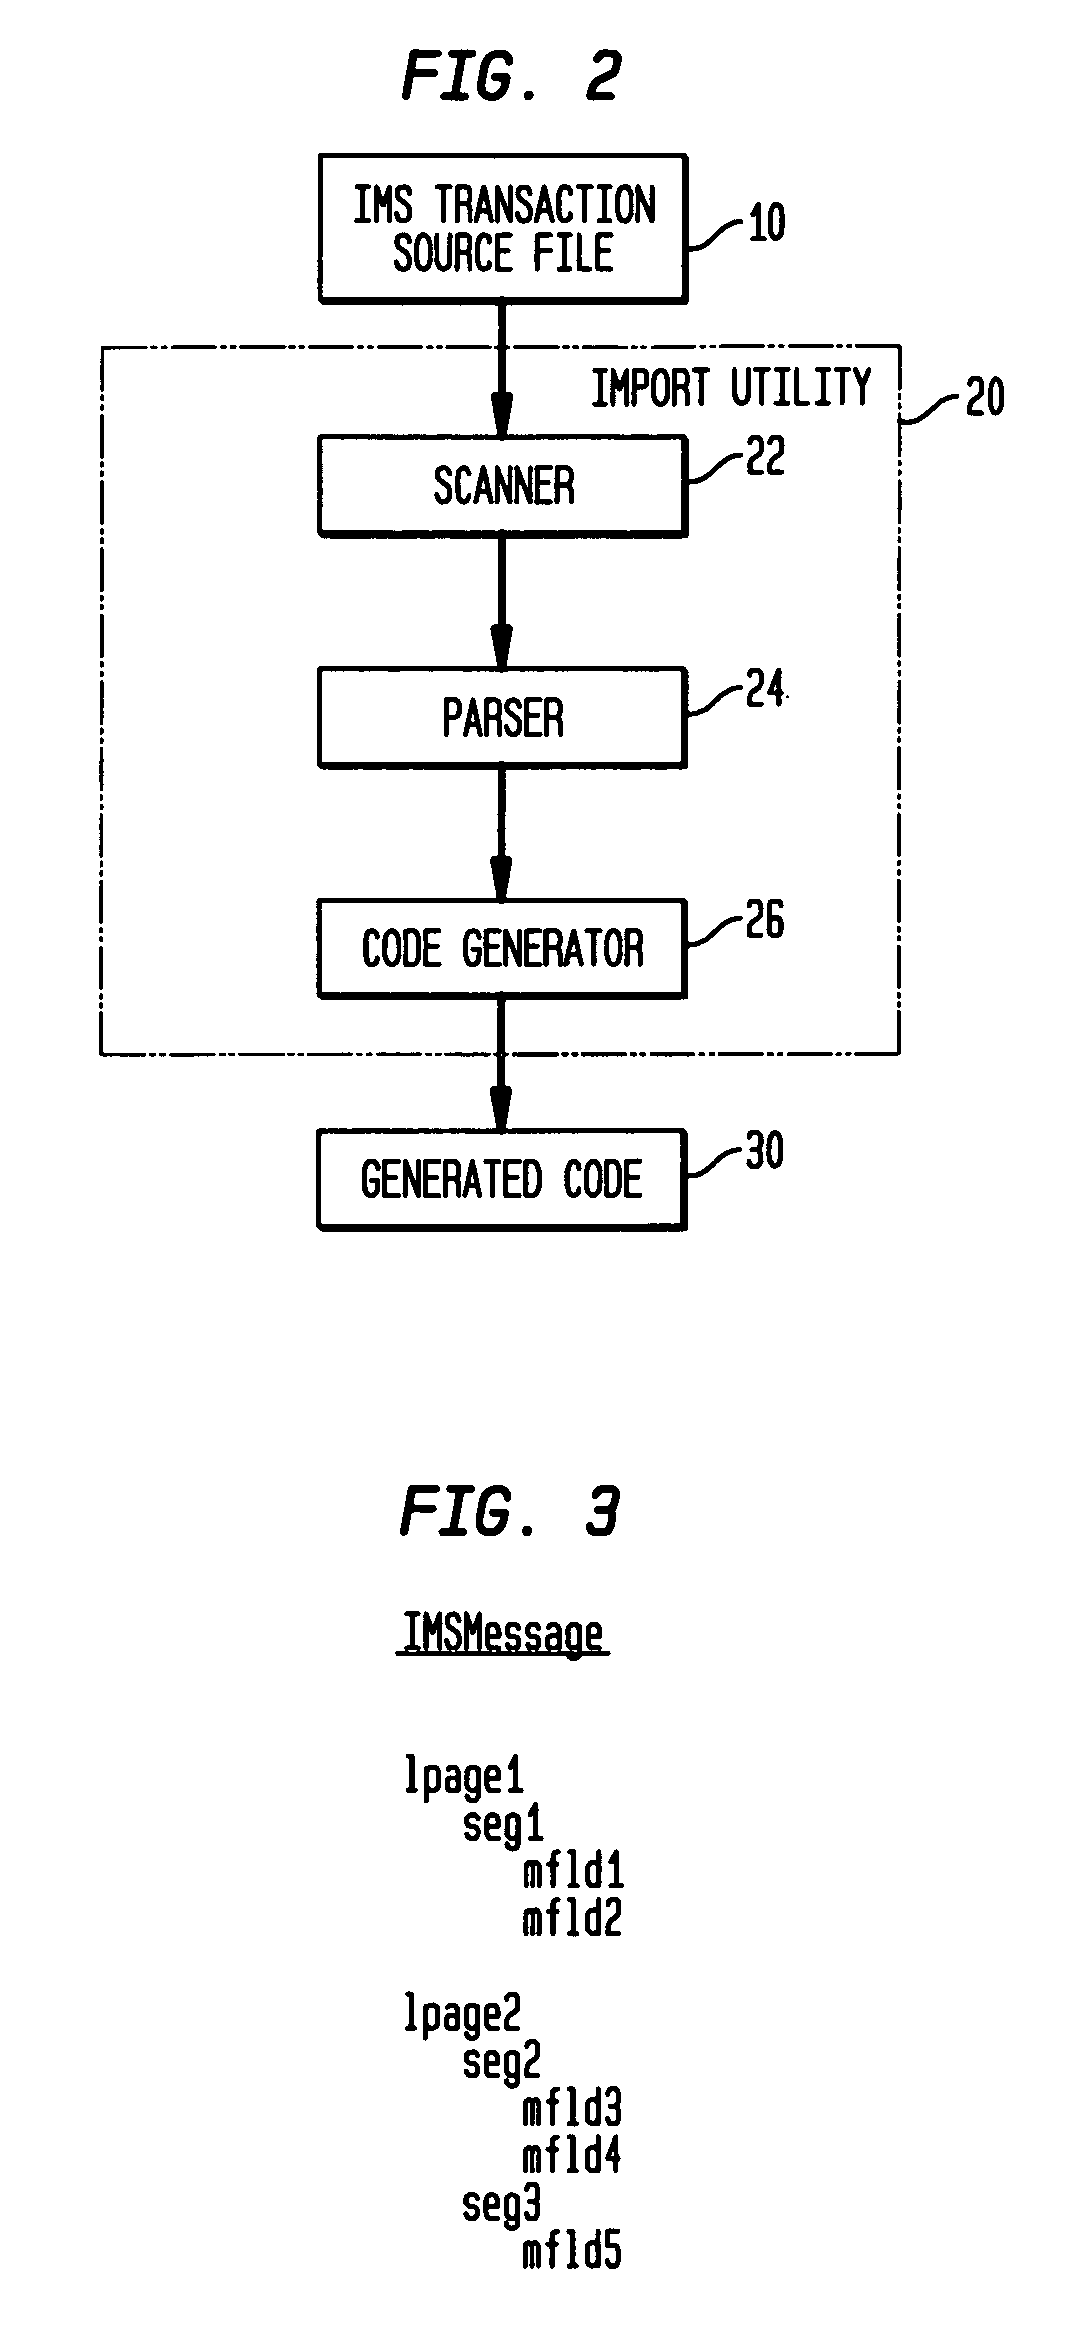 Automated interface generation for computer programs in different environments